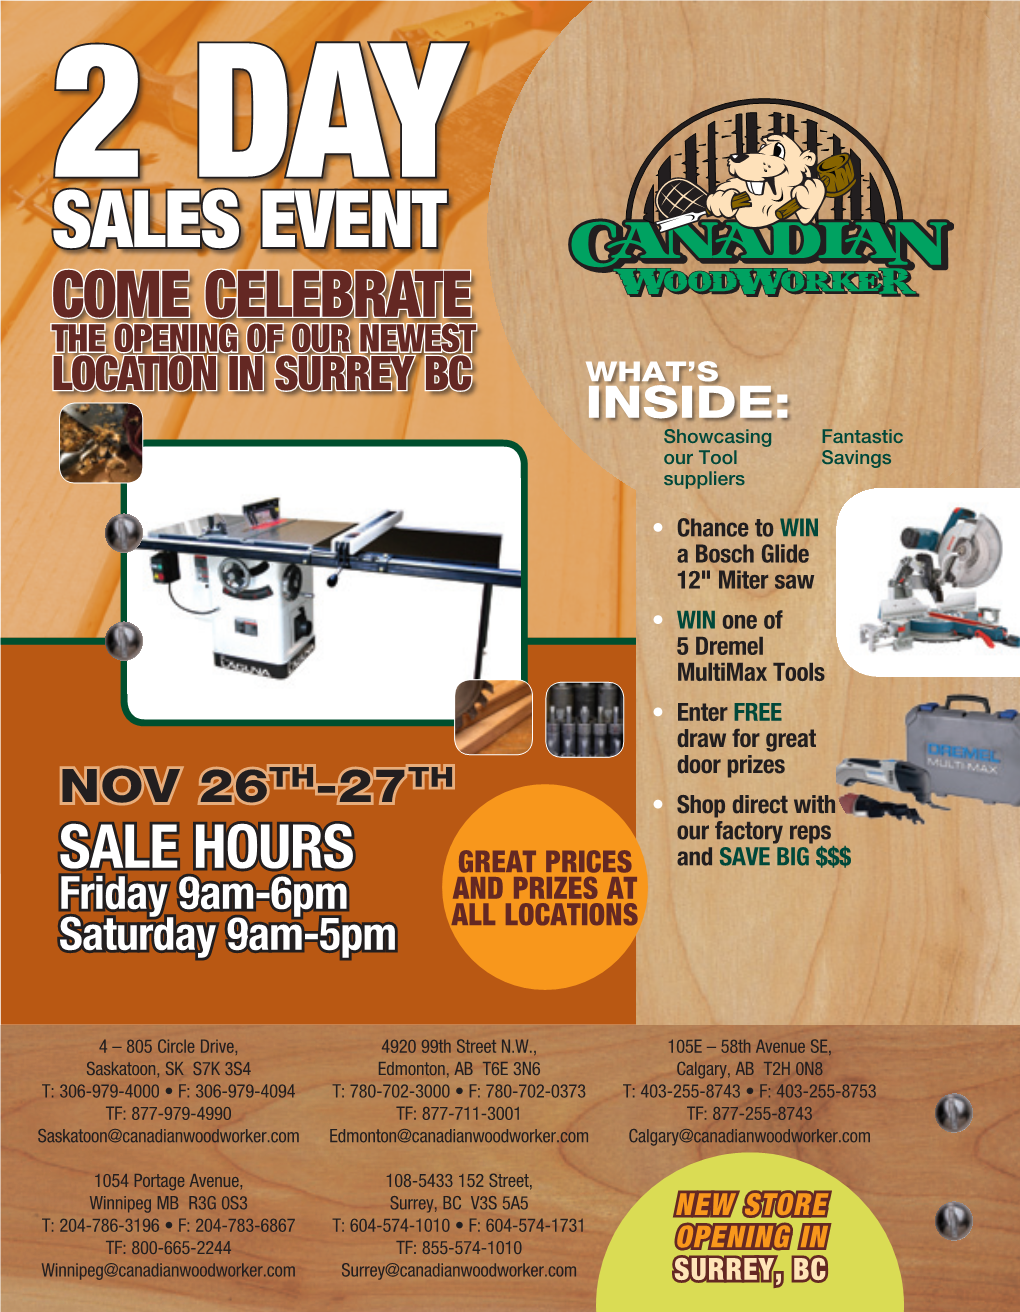 Sales Event Come Celebrate the Opening of Our Newest Location in Surrey BC What’S Inside: Showcasing Fantastic Our Tool Savings Suppliers